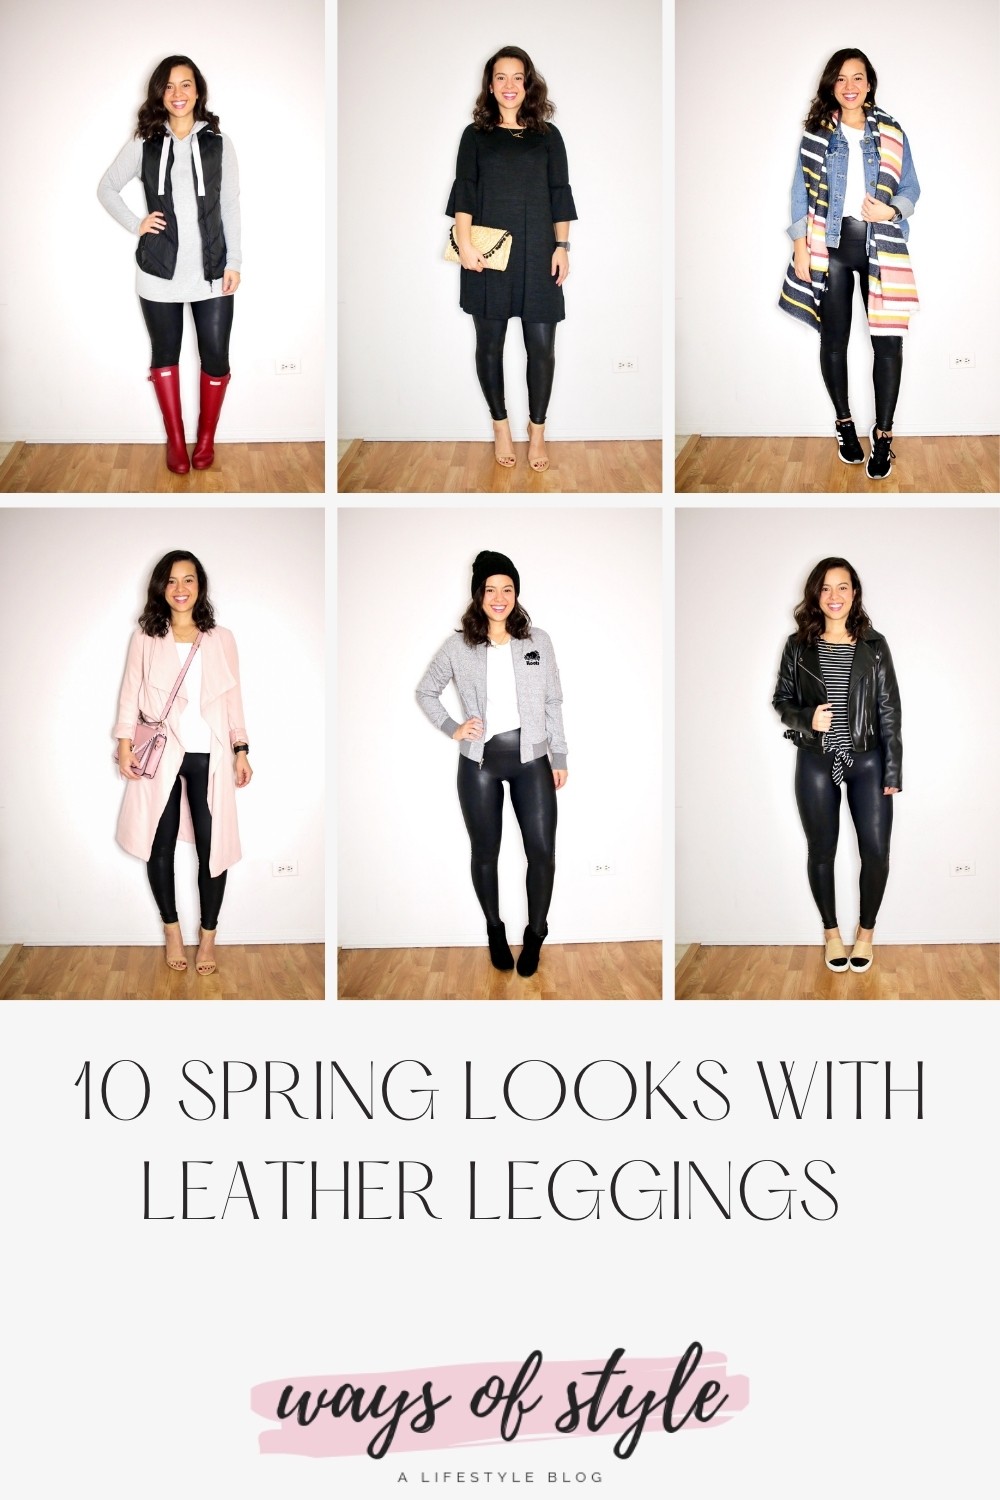 25 Trendy Spring Outfits To Make You Glam In Spring - Women Fashion  Lifestyle Blog Shinecoco.com | Outfits with leggings, Leggings outfit  casual, What to wear with leather leggings